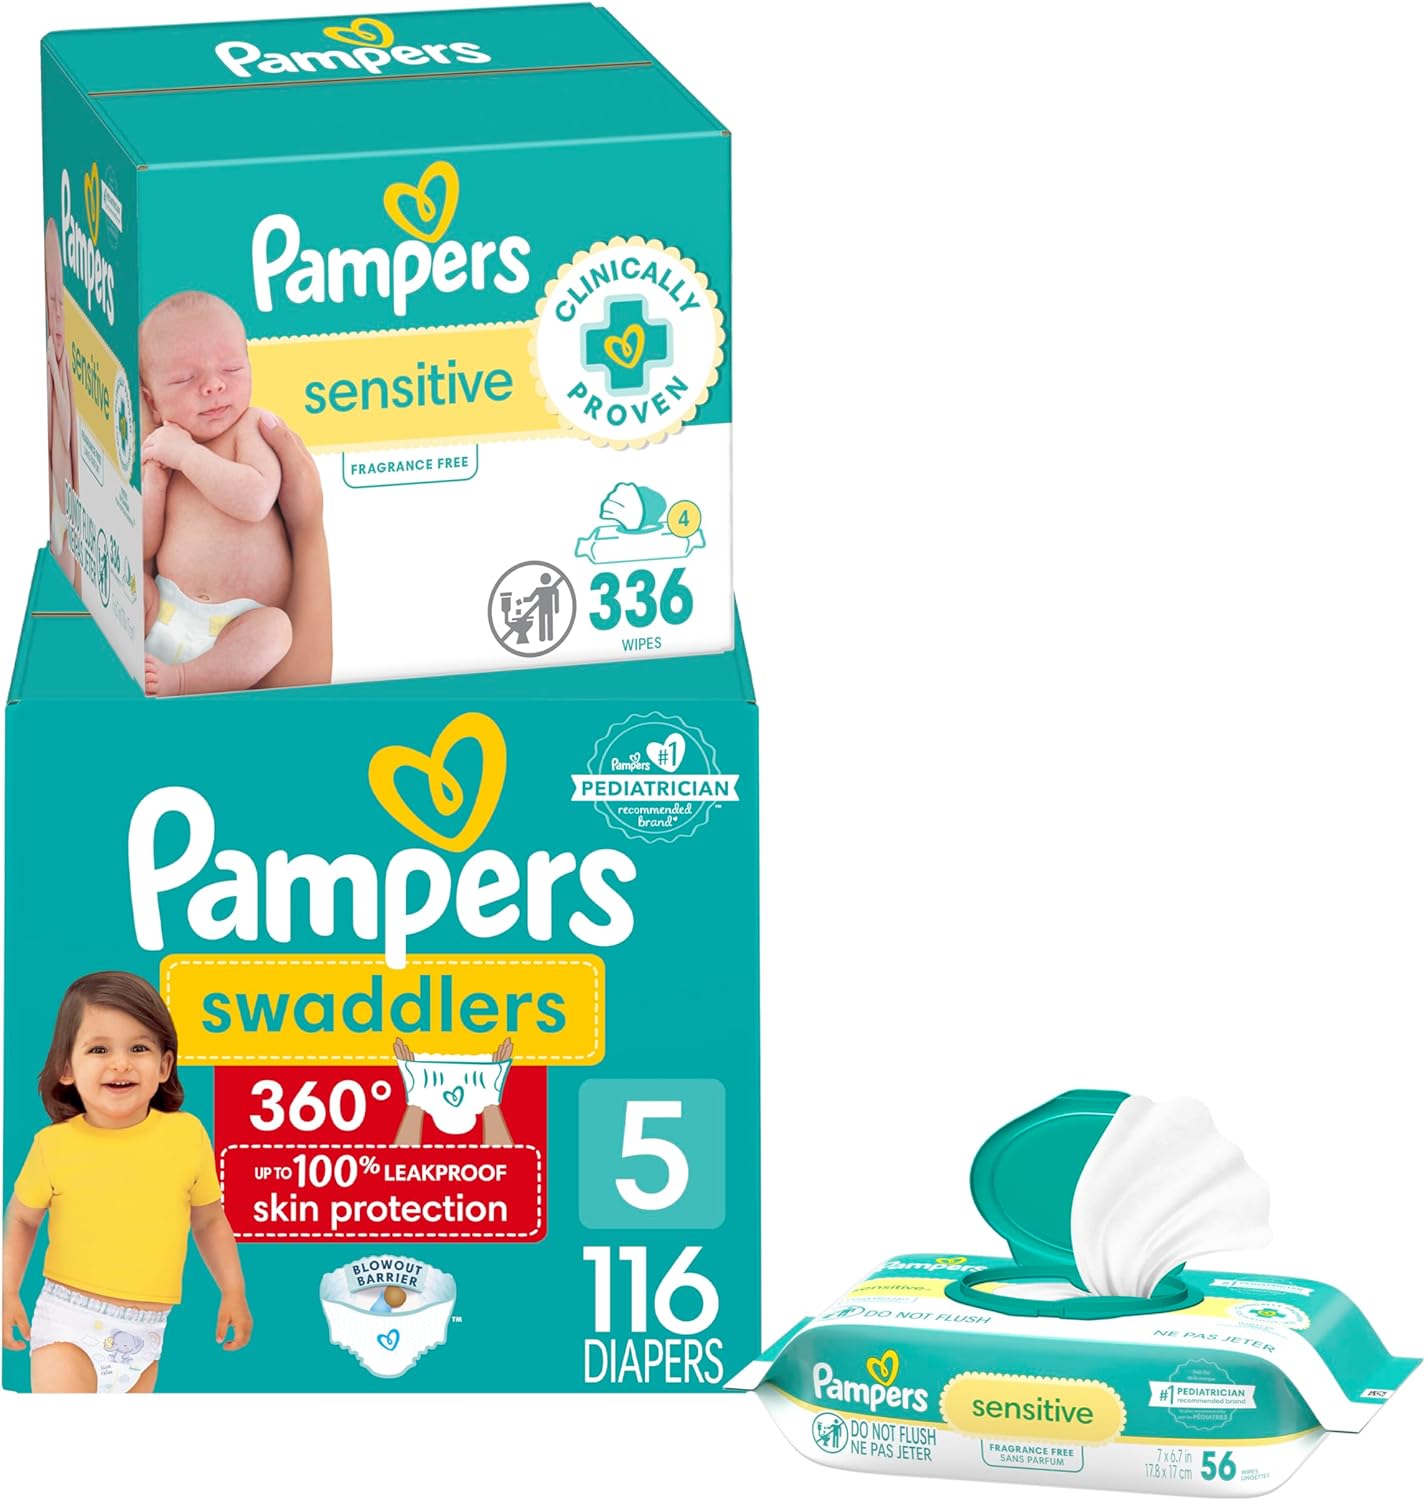 Pampers Swaddlers 360 Pull-On Diapers, Size 5, 116 Count, One Month Supply with Sensitive Baby Wipes, 4 Flip-Top Packs (336 Wipes Total) [Packaging May Vary]